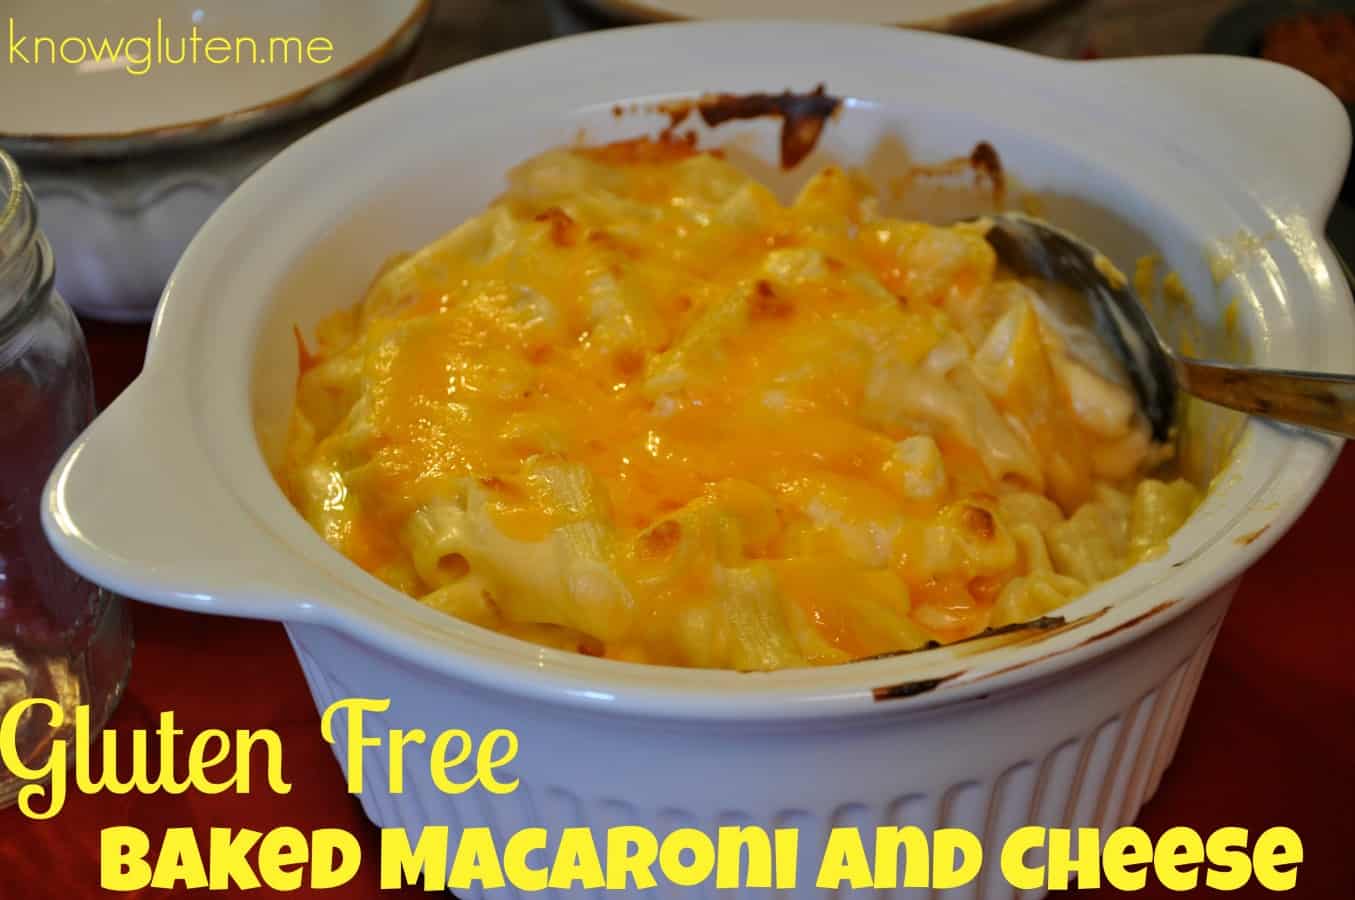 easy gluten free mac and cheese